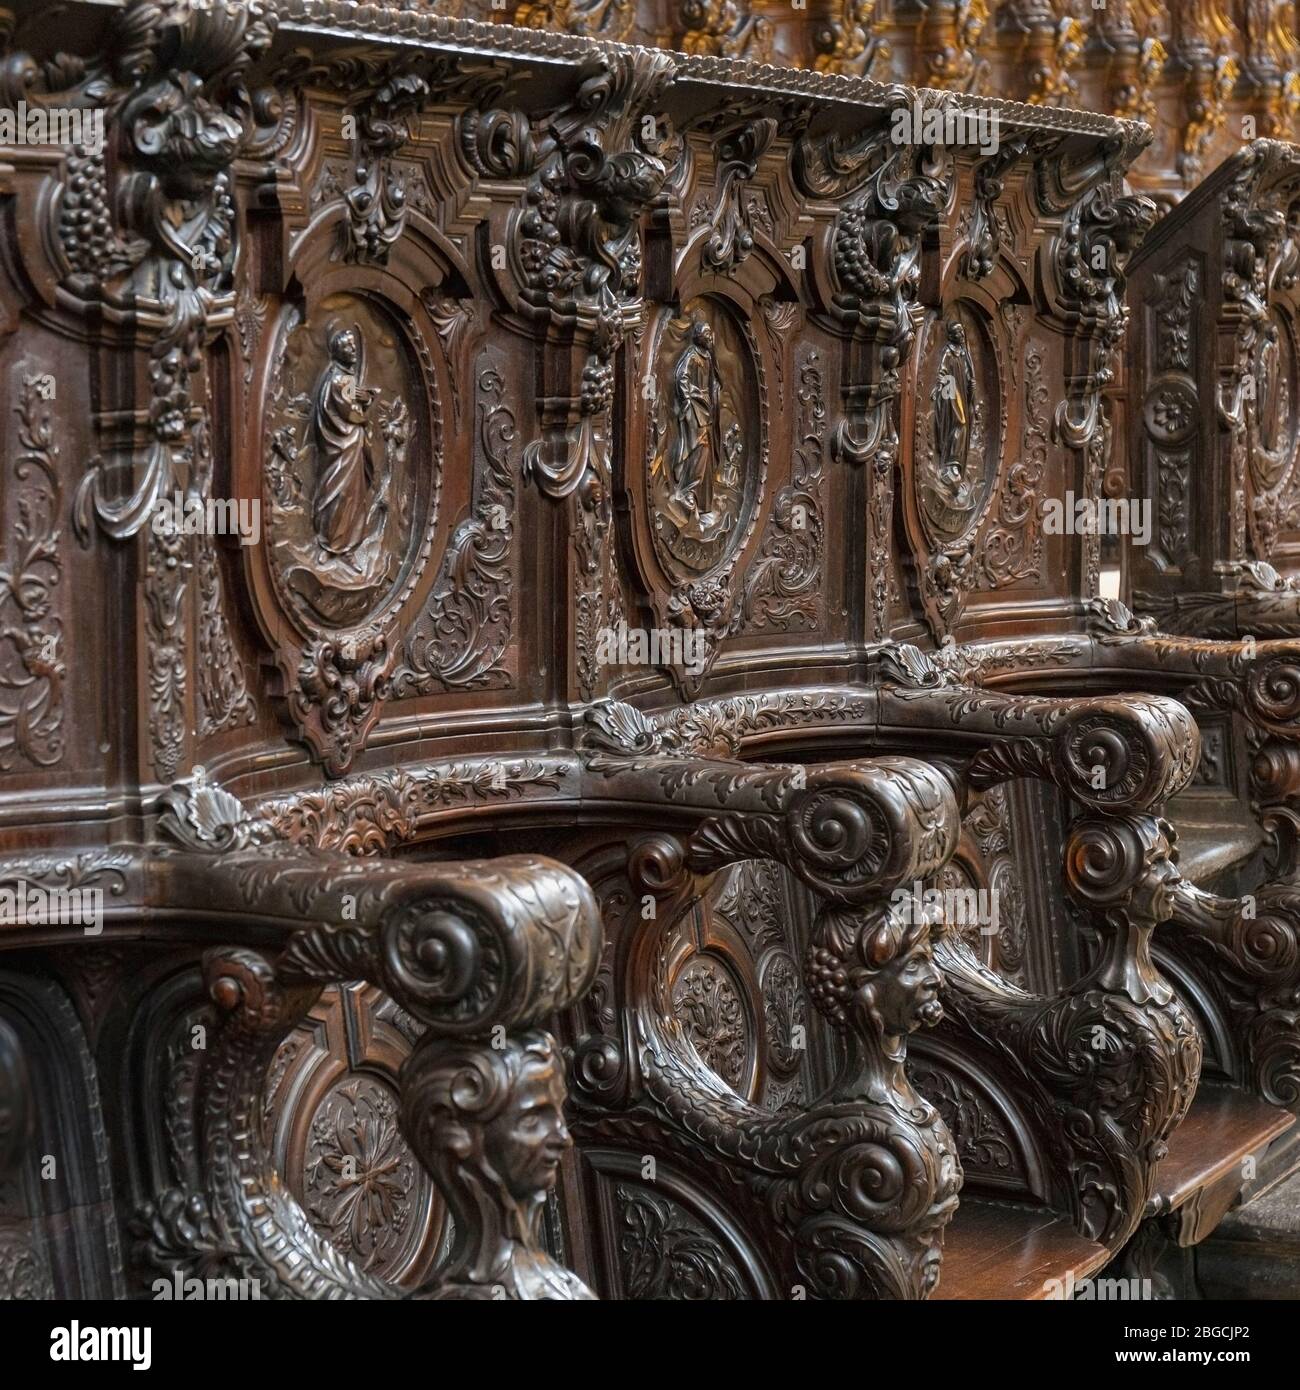 La Mezquita.  The Mosque.  Interior.  The 18th century carved wood choir stalls in the cathedral rear of the mosque.  They are the work of  Spanish sc Stock Photo